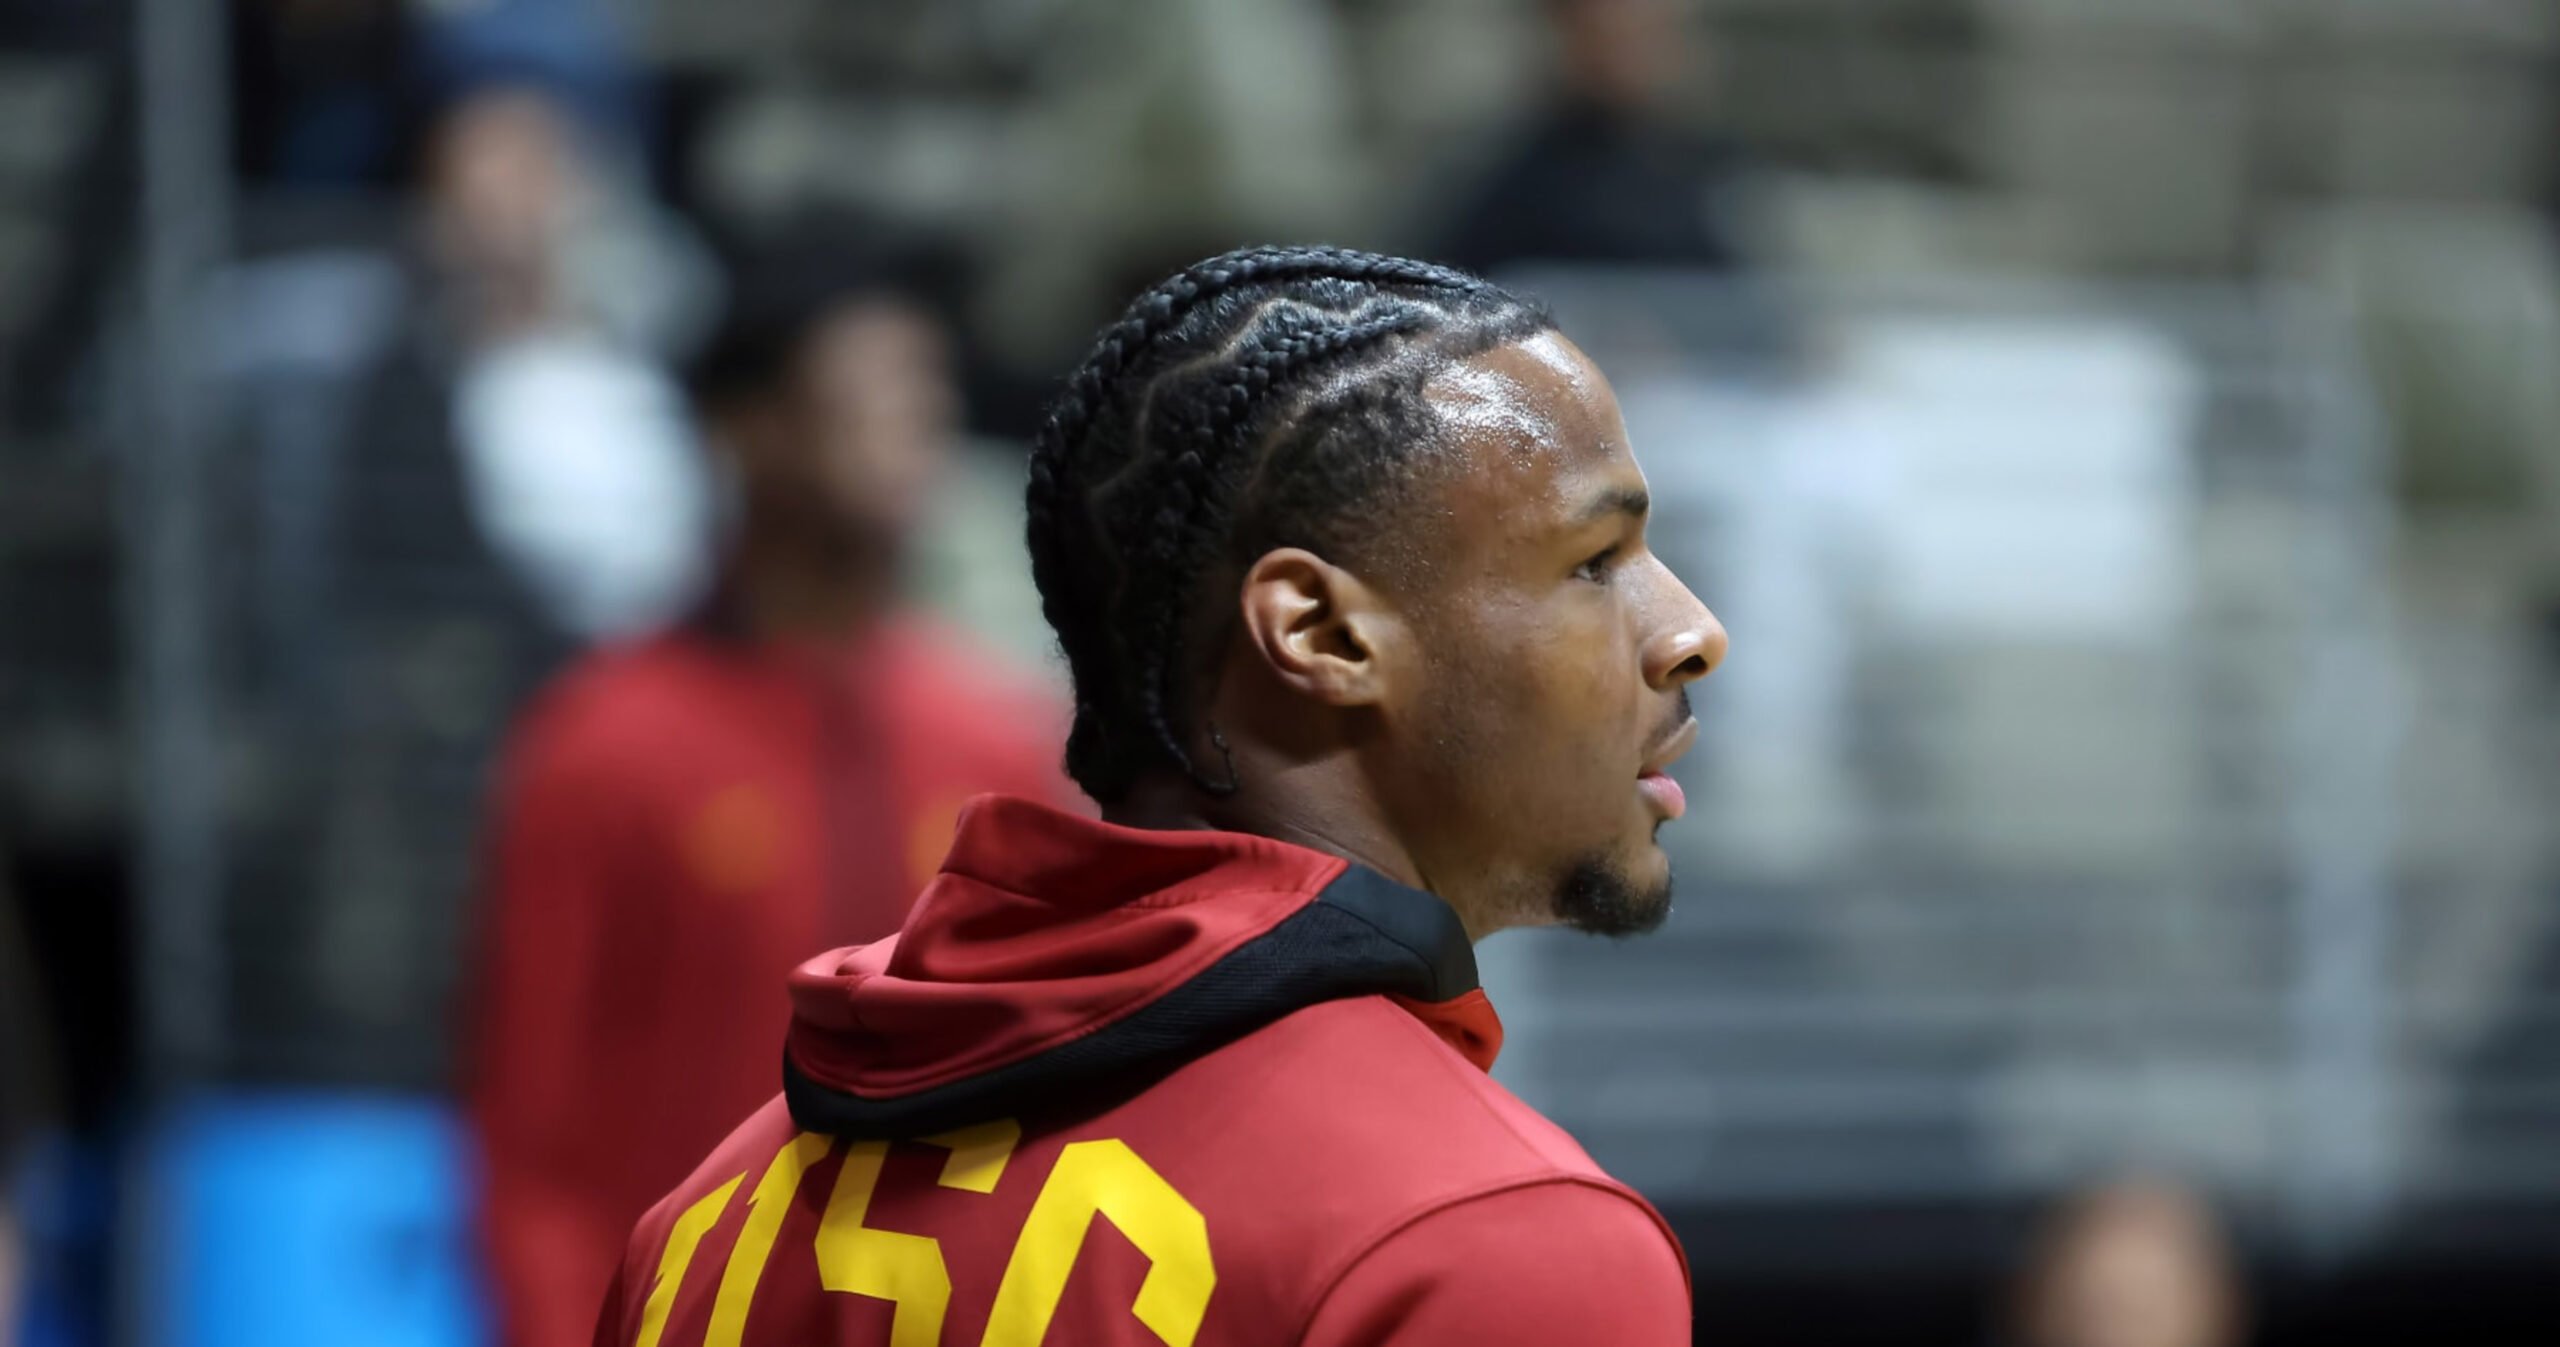 Bronny James Impresses Fans With 15 Points in USC’s Loss to Oregon State